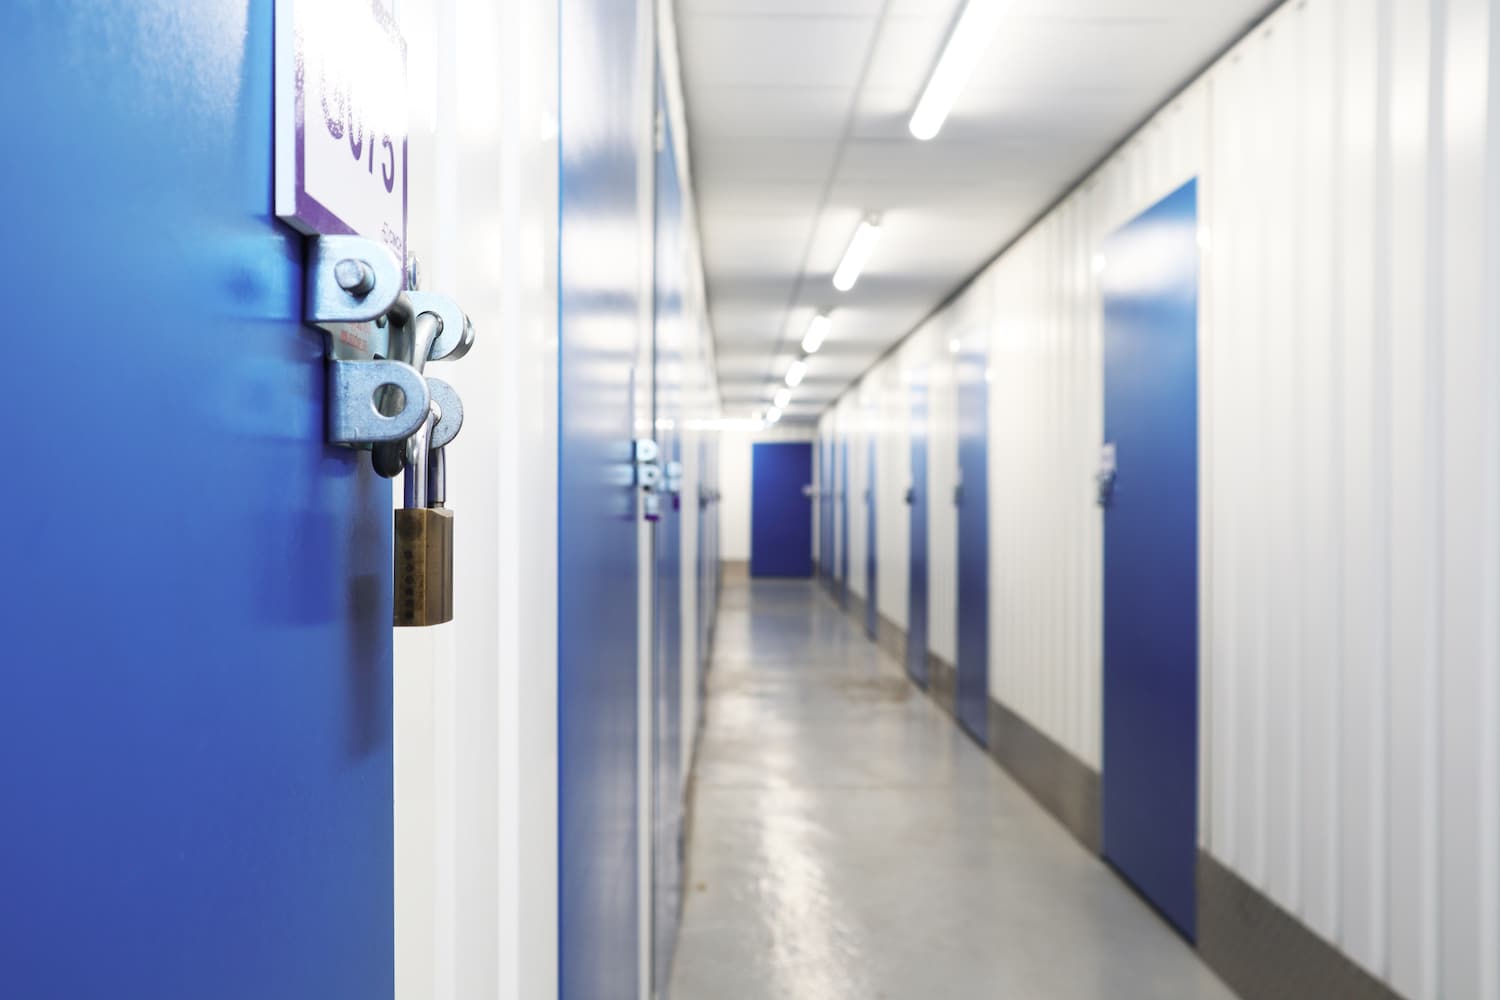 Storage unit in Mitcham. Image shows a close up view of a padlock on a storage unit blue door. With a corridor of storage units beyond.